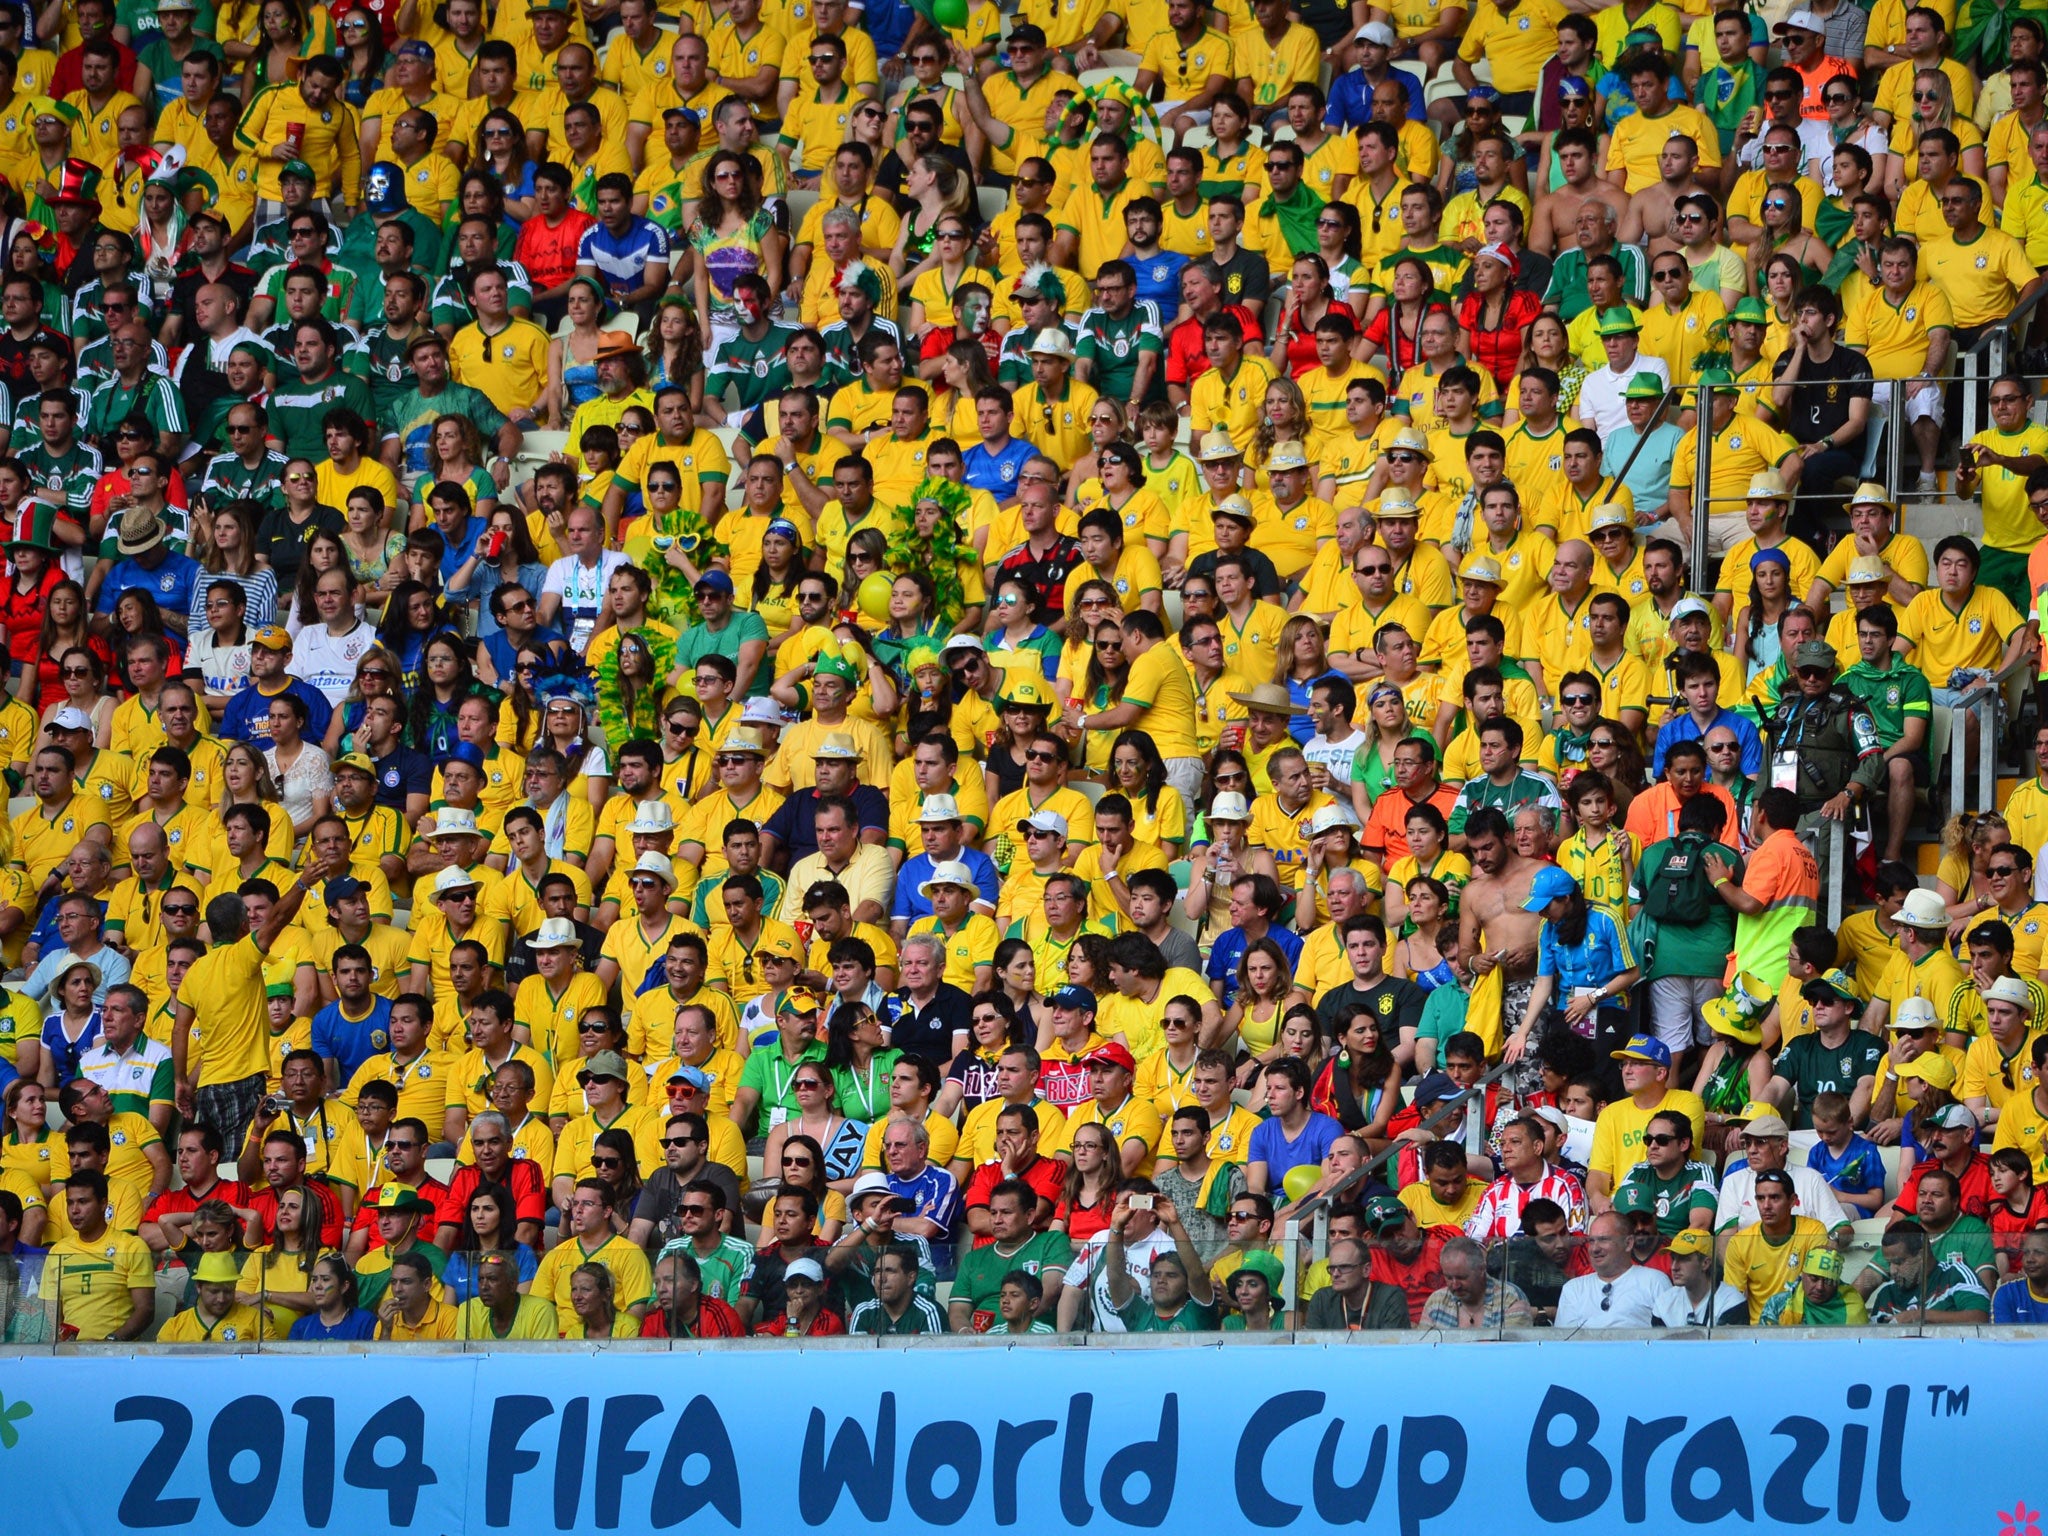 Brazil, Mexico, Russia and Croatia fans are being investigated by Fifa